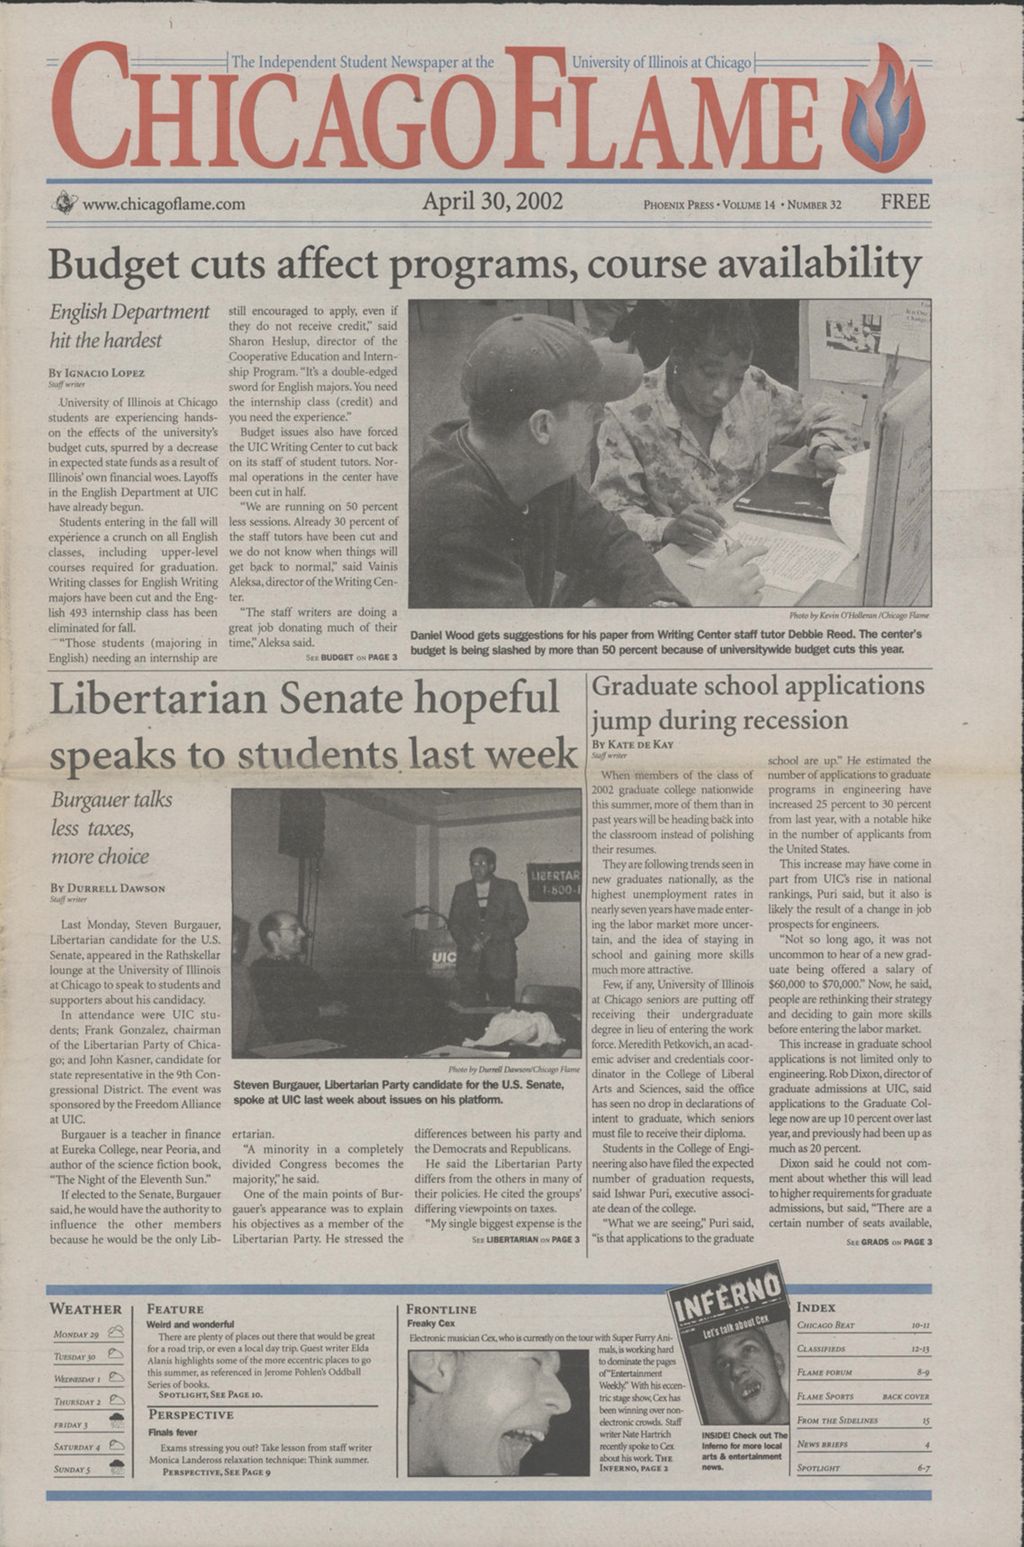 Chicago Flame (April 30, 2002)